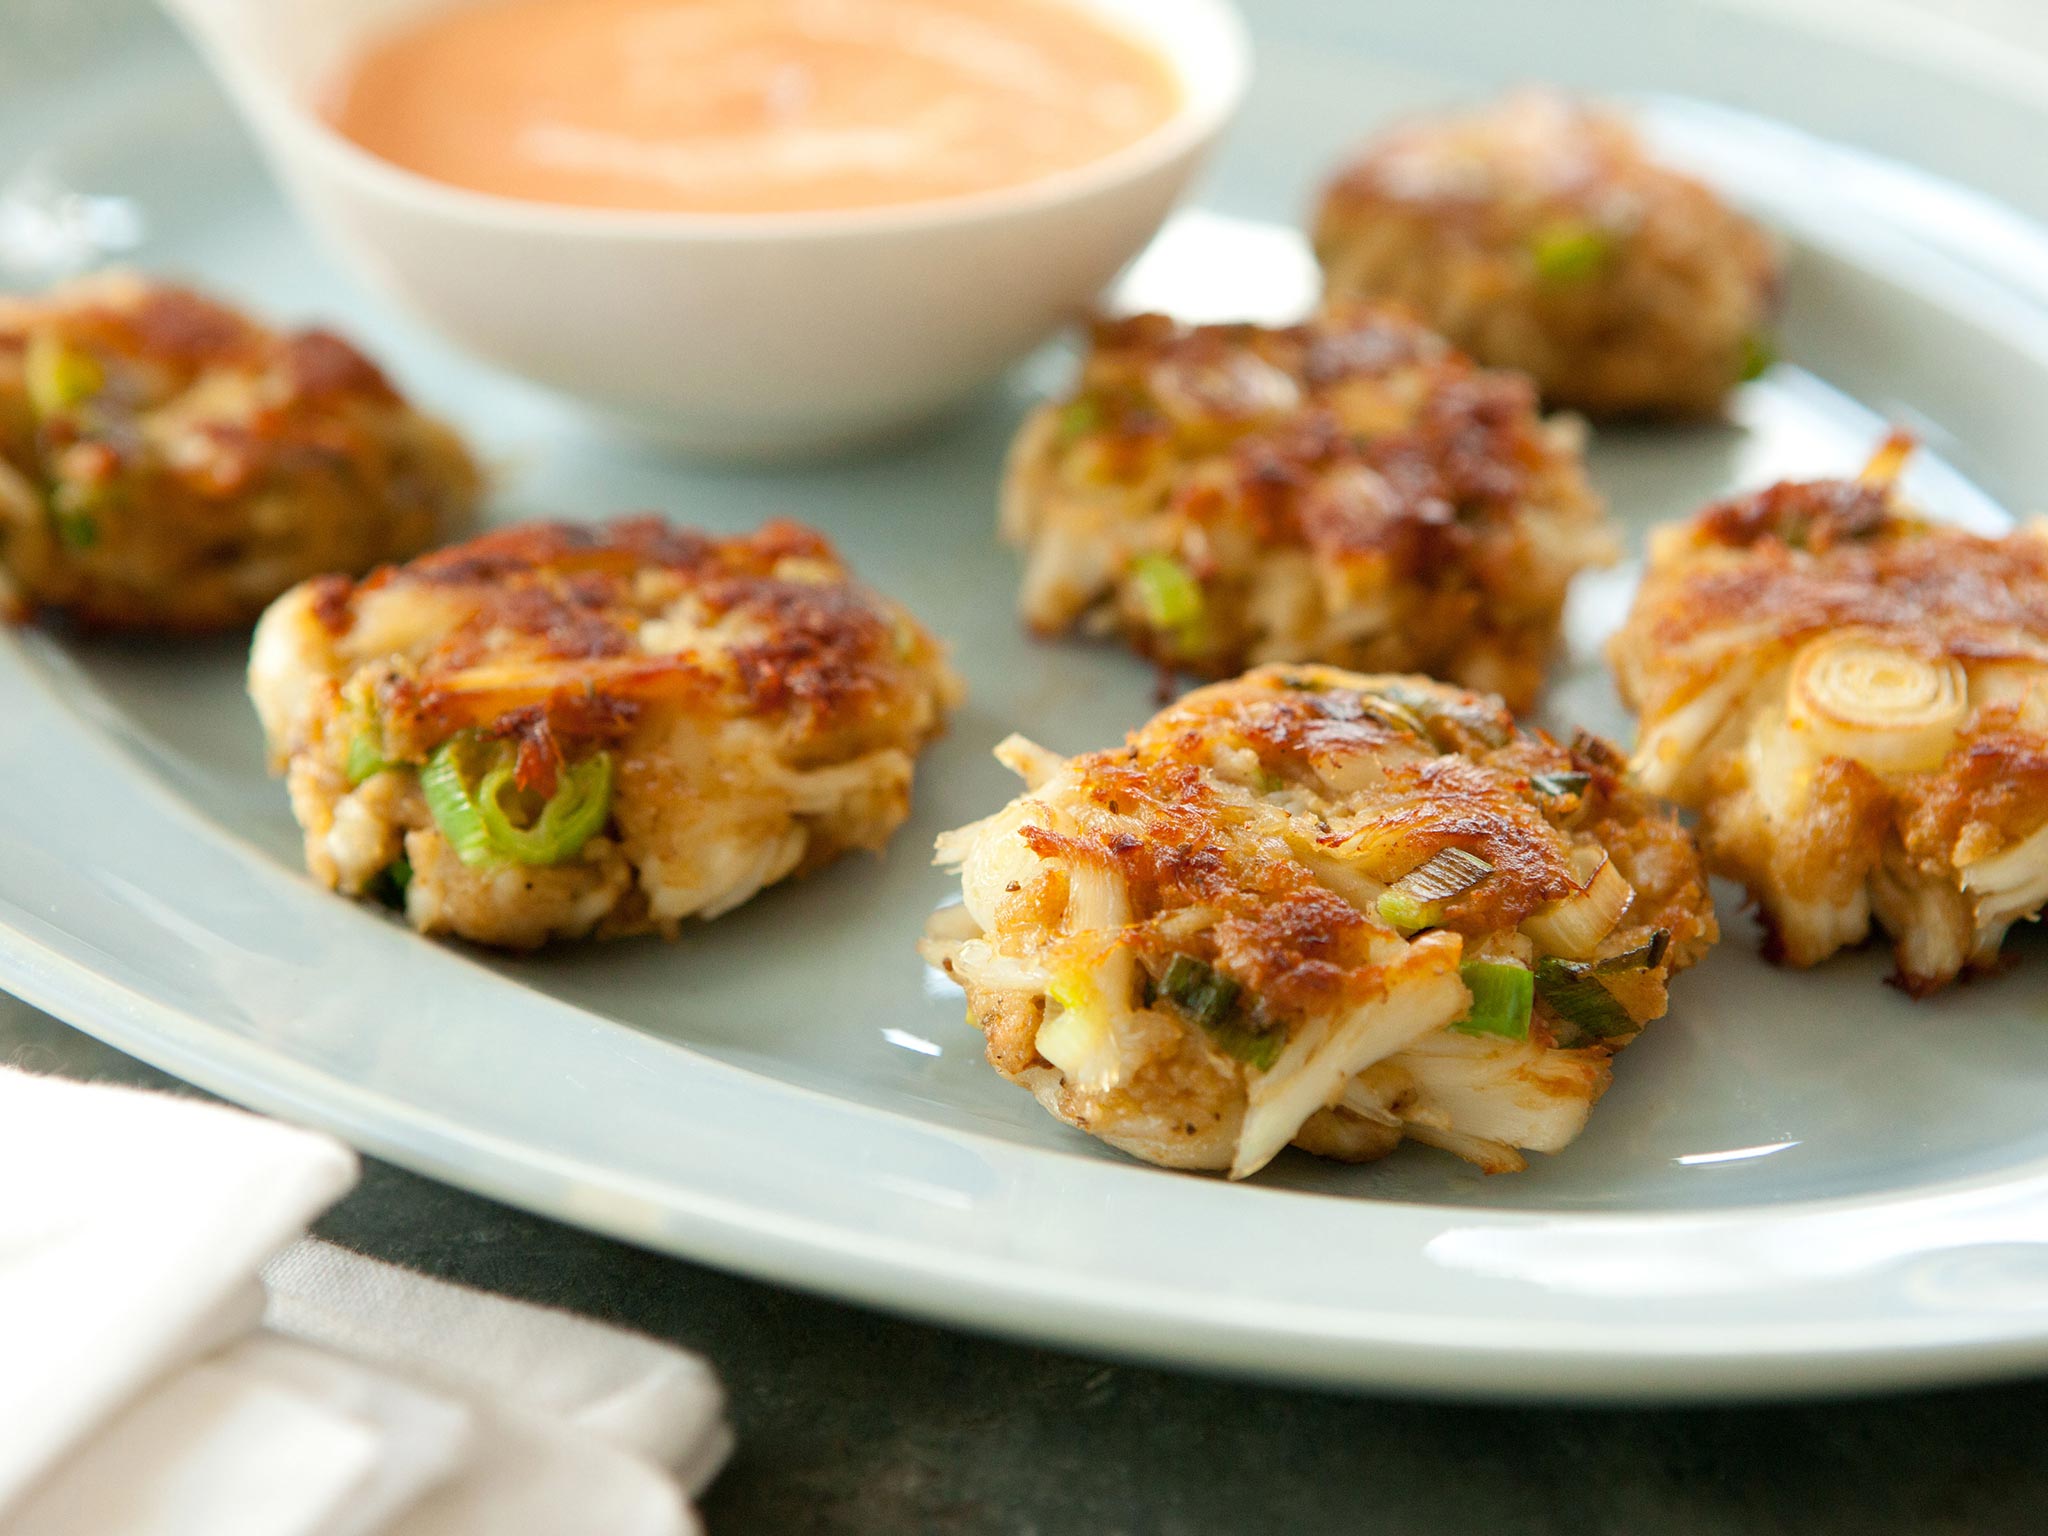 How To Cook Whole Foods Jumbo Lump Crab Cakes